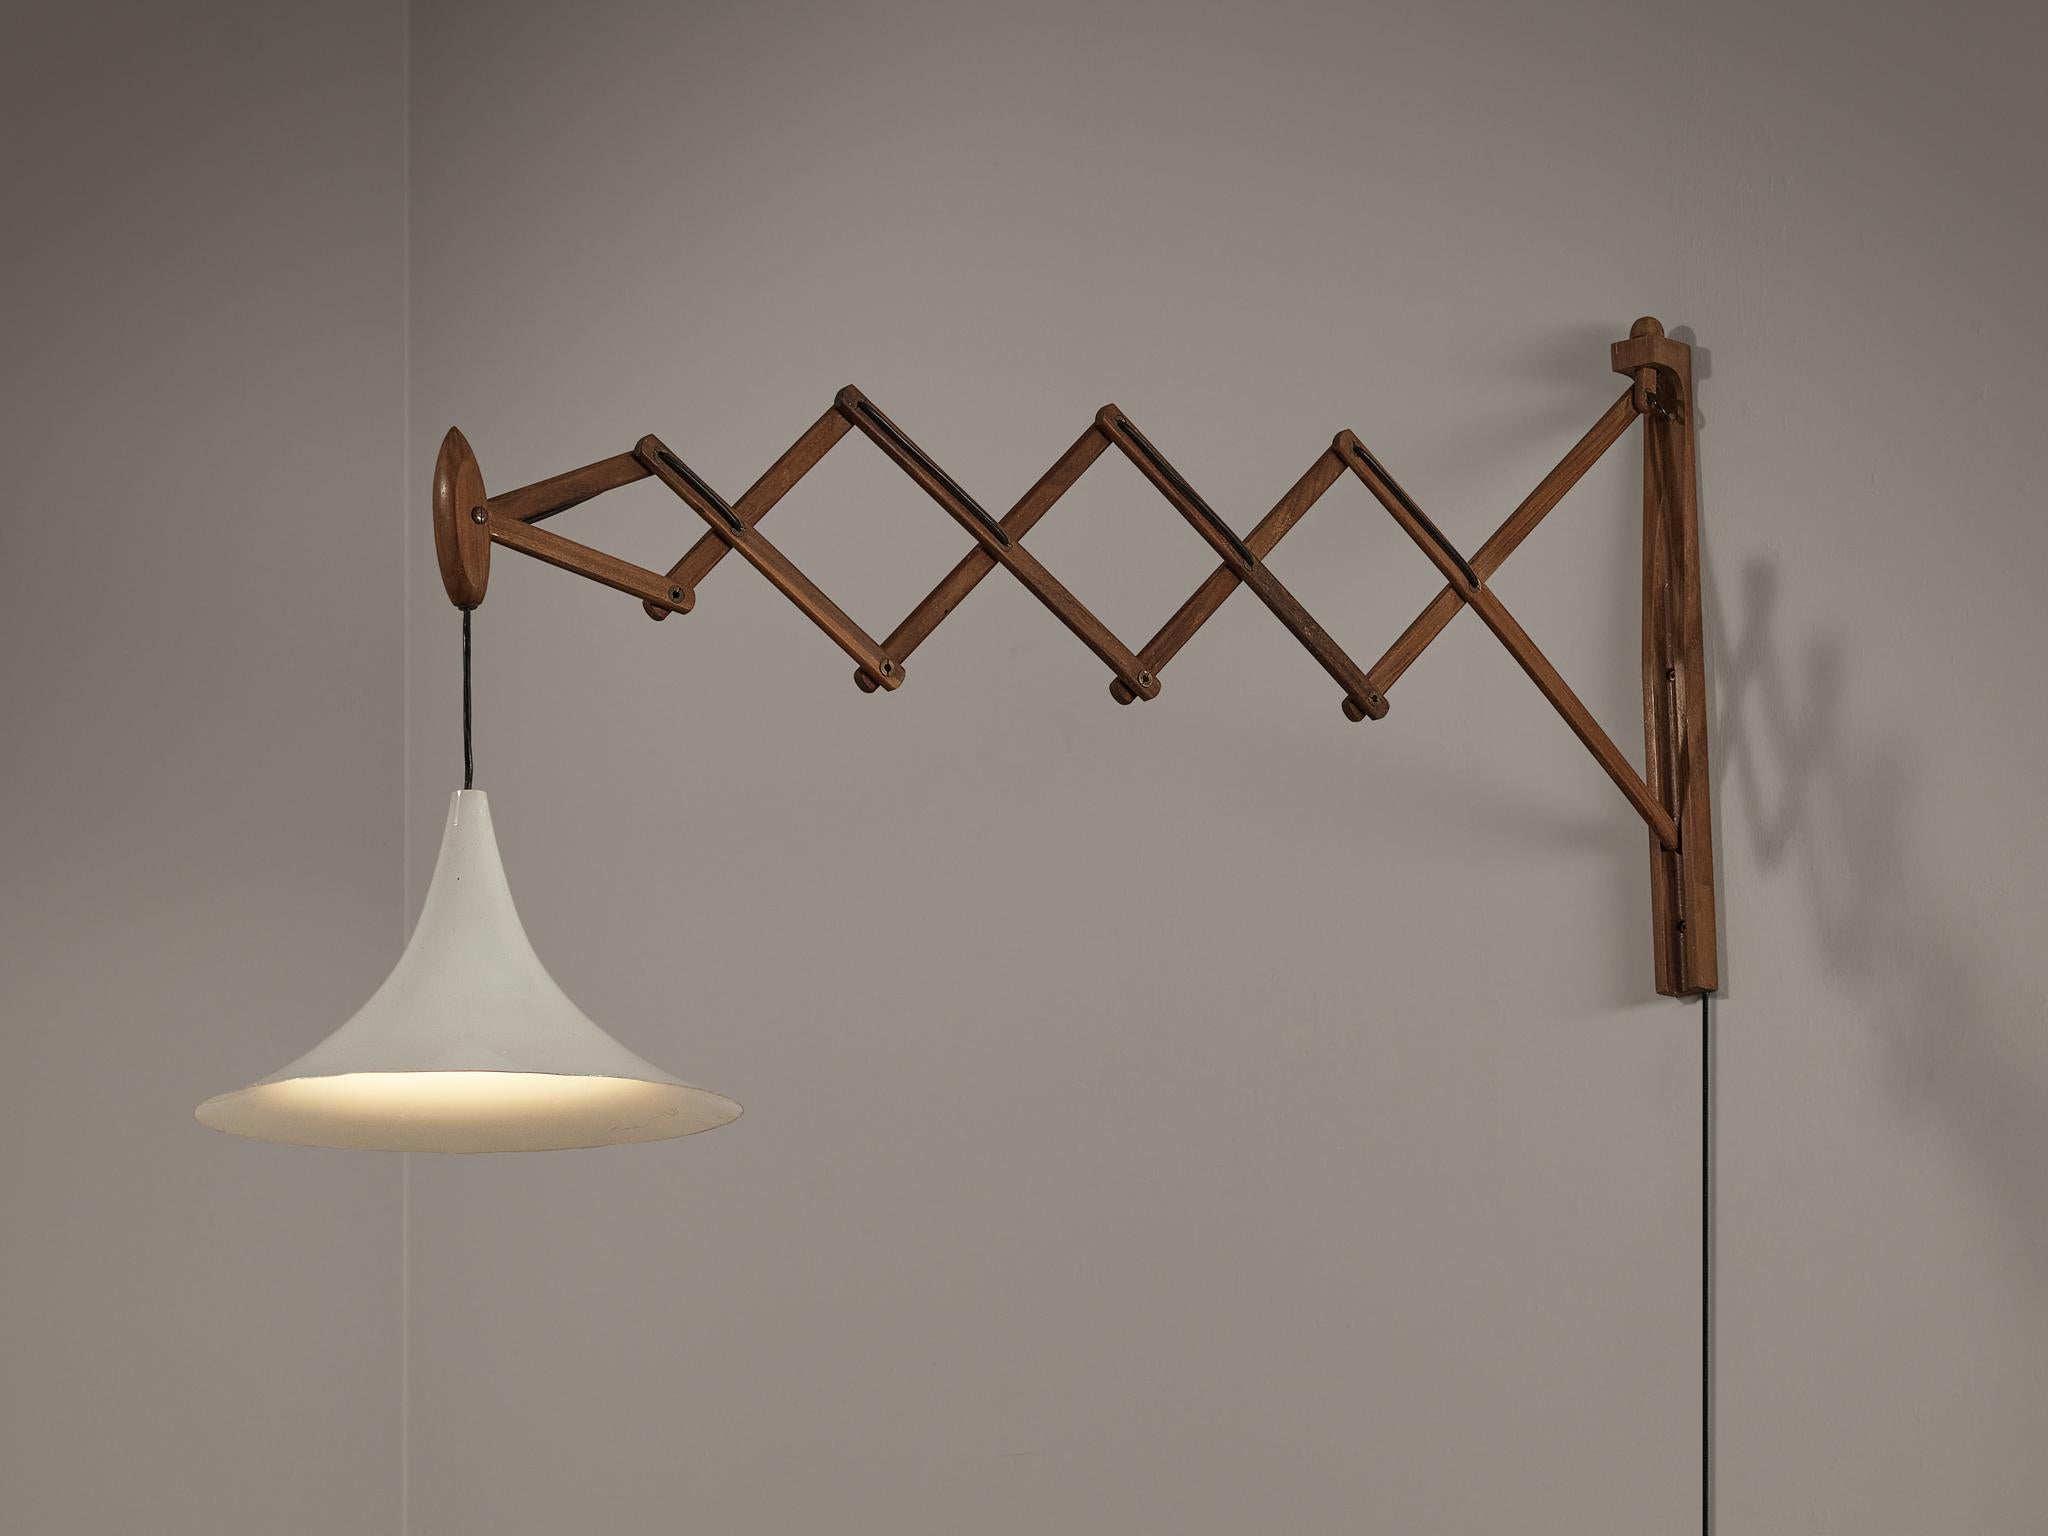 Scissor wall light, teak, coated aluminum, brass, Italy, 1950s.

This Italian scissor wall light is of considerable size and designed with practicality in mind. The scissor feature enables the user to move the flexible arm as an accordion, pushing